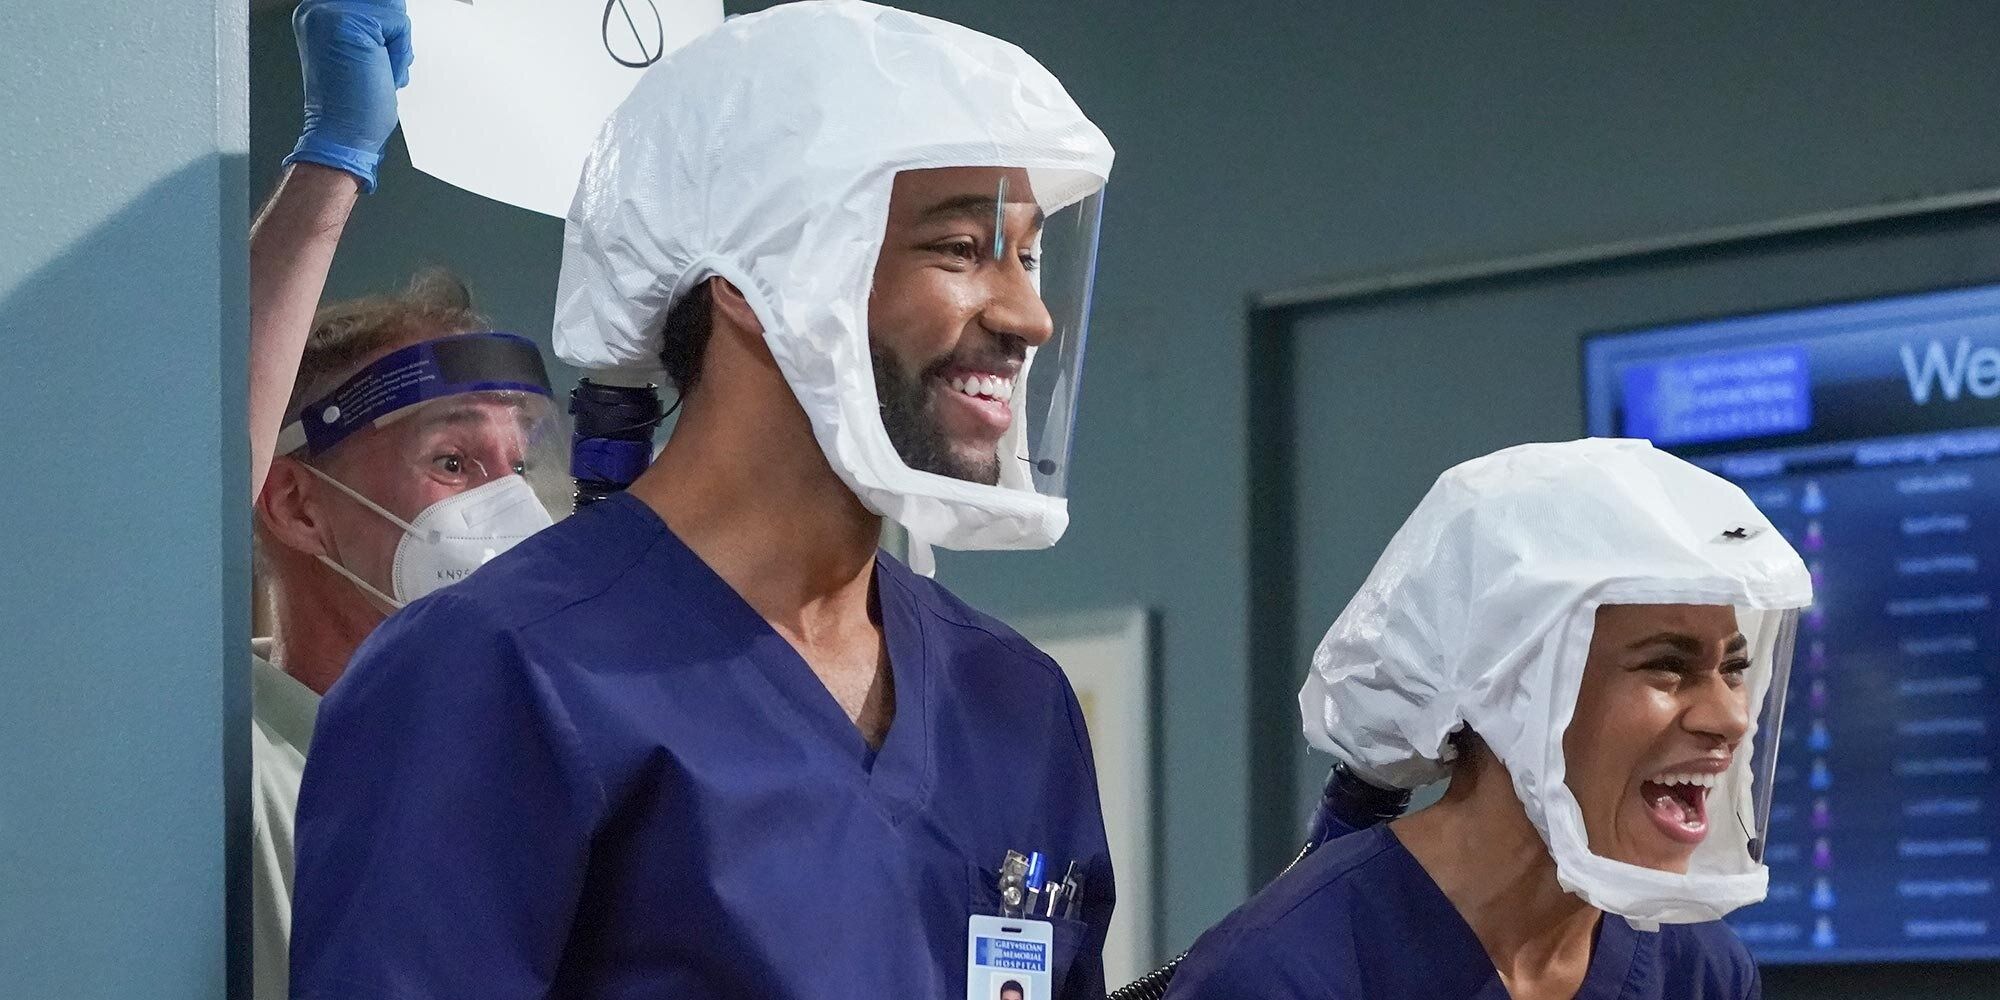 Greys Anatomy 10 Things You May Not Have Known About Winston Ndugu